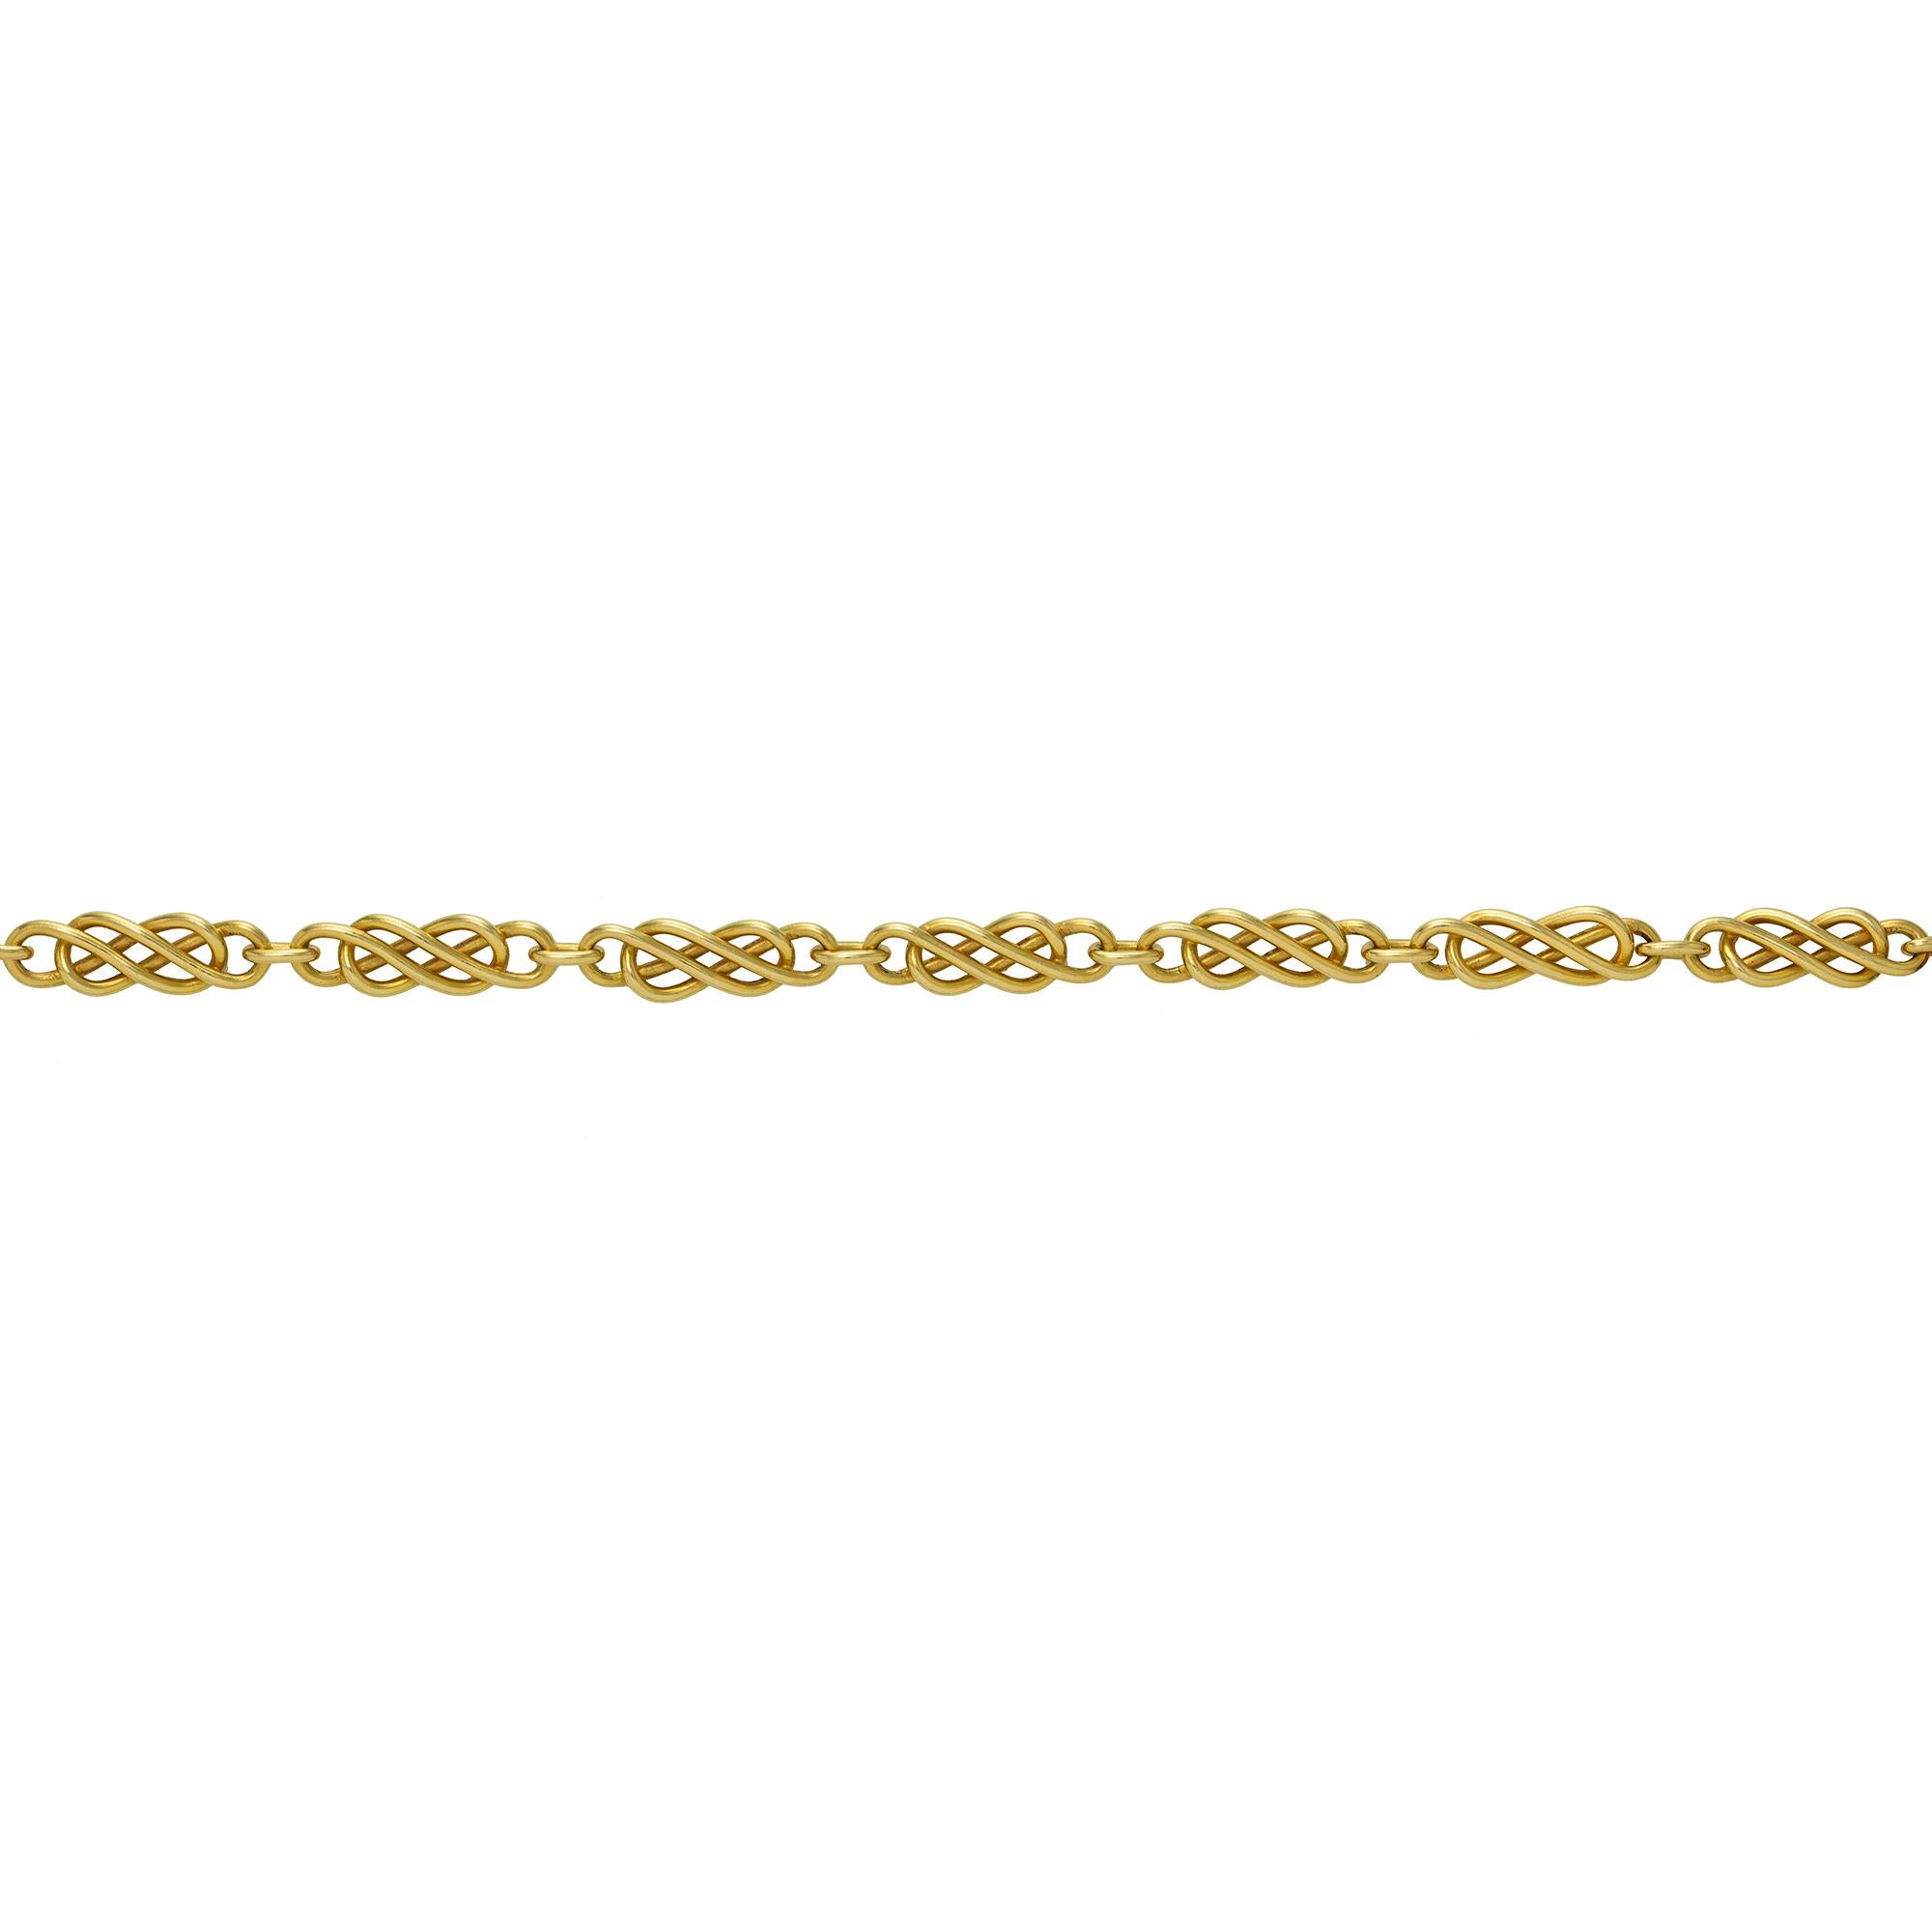 A handmade Celtic gold necklace by Lucie Heskett-Brem the Gold Weaver of Lucerne, consisting of twenty-one sections of Celtic design, hallmarked 18ct gold, measuring approximately 45 x 0.65cm, gross weight 43.6 grams.
Should you choose to make this